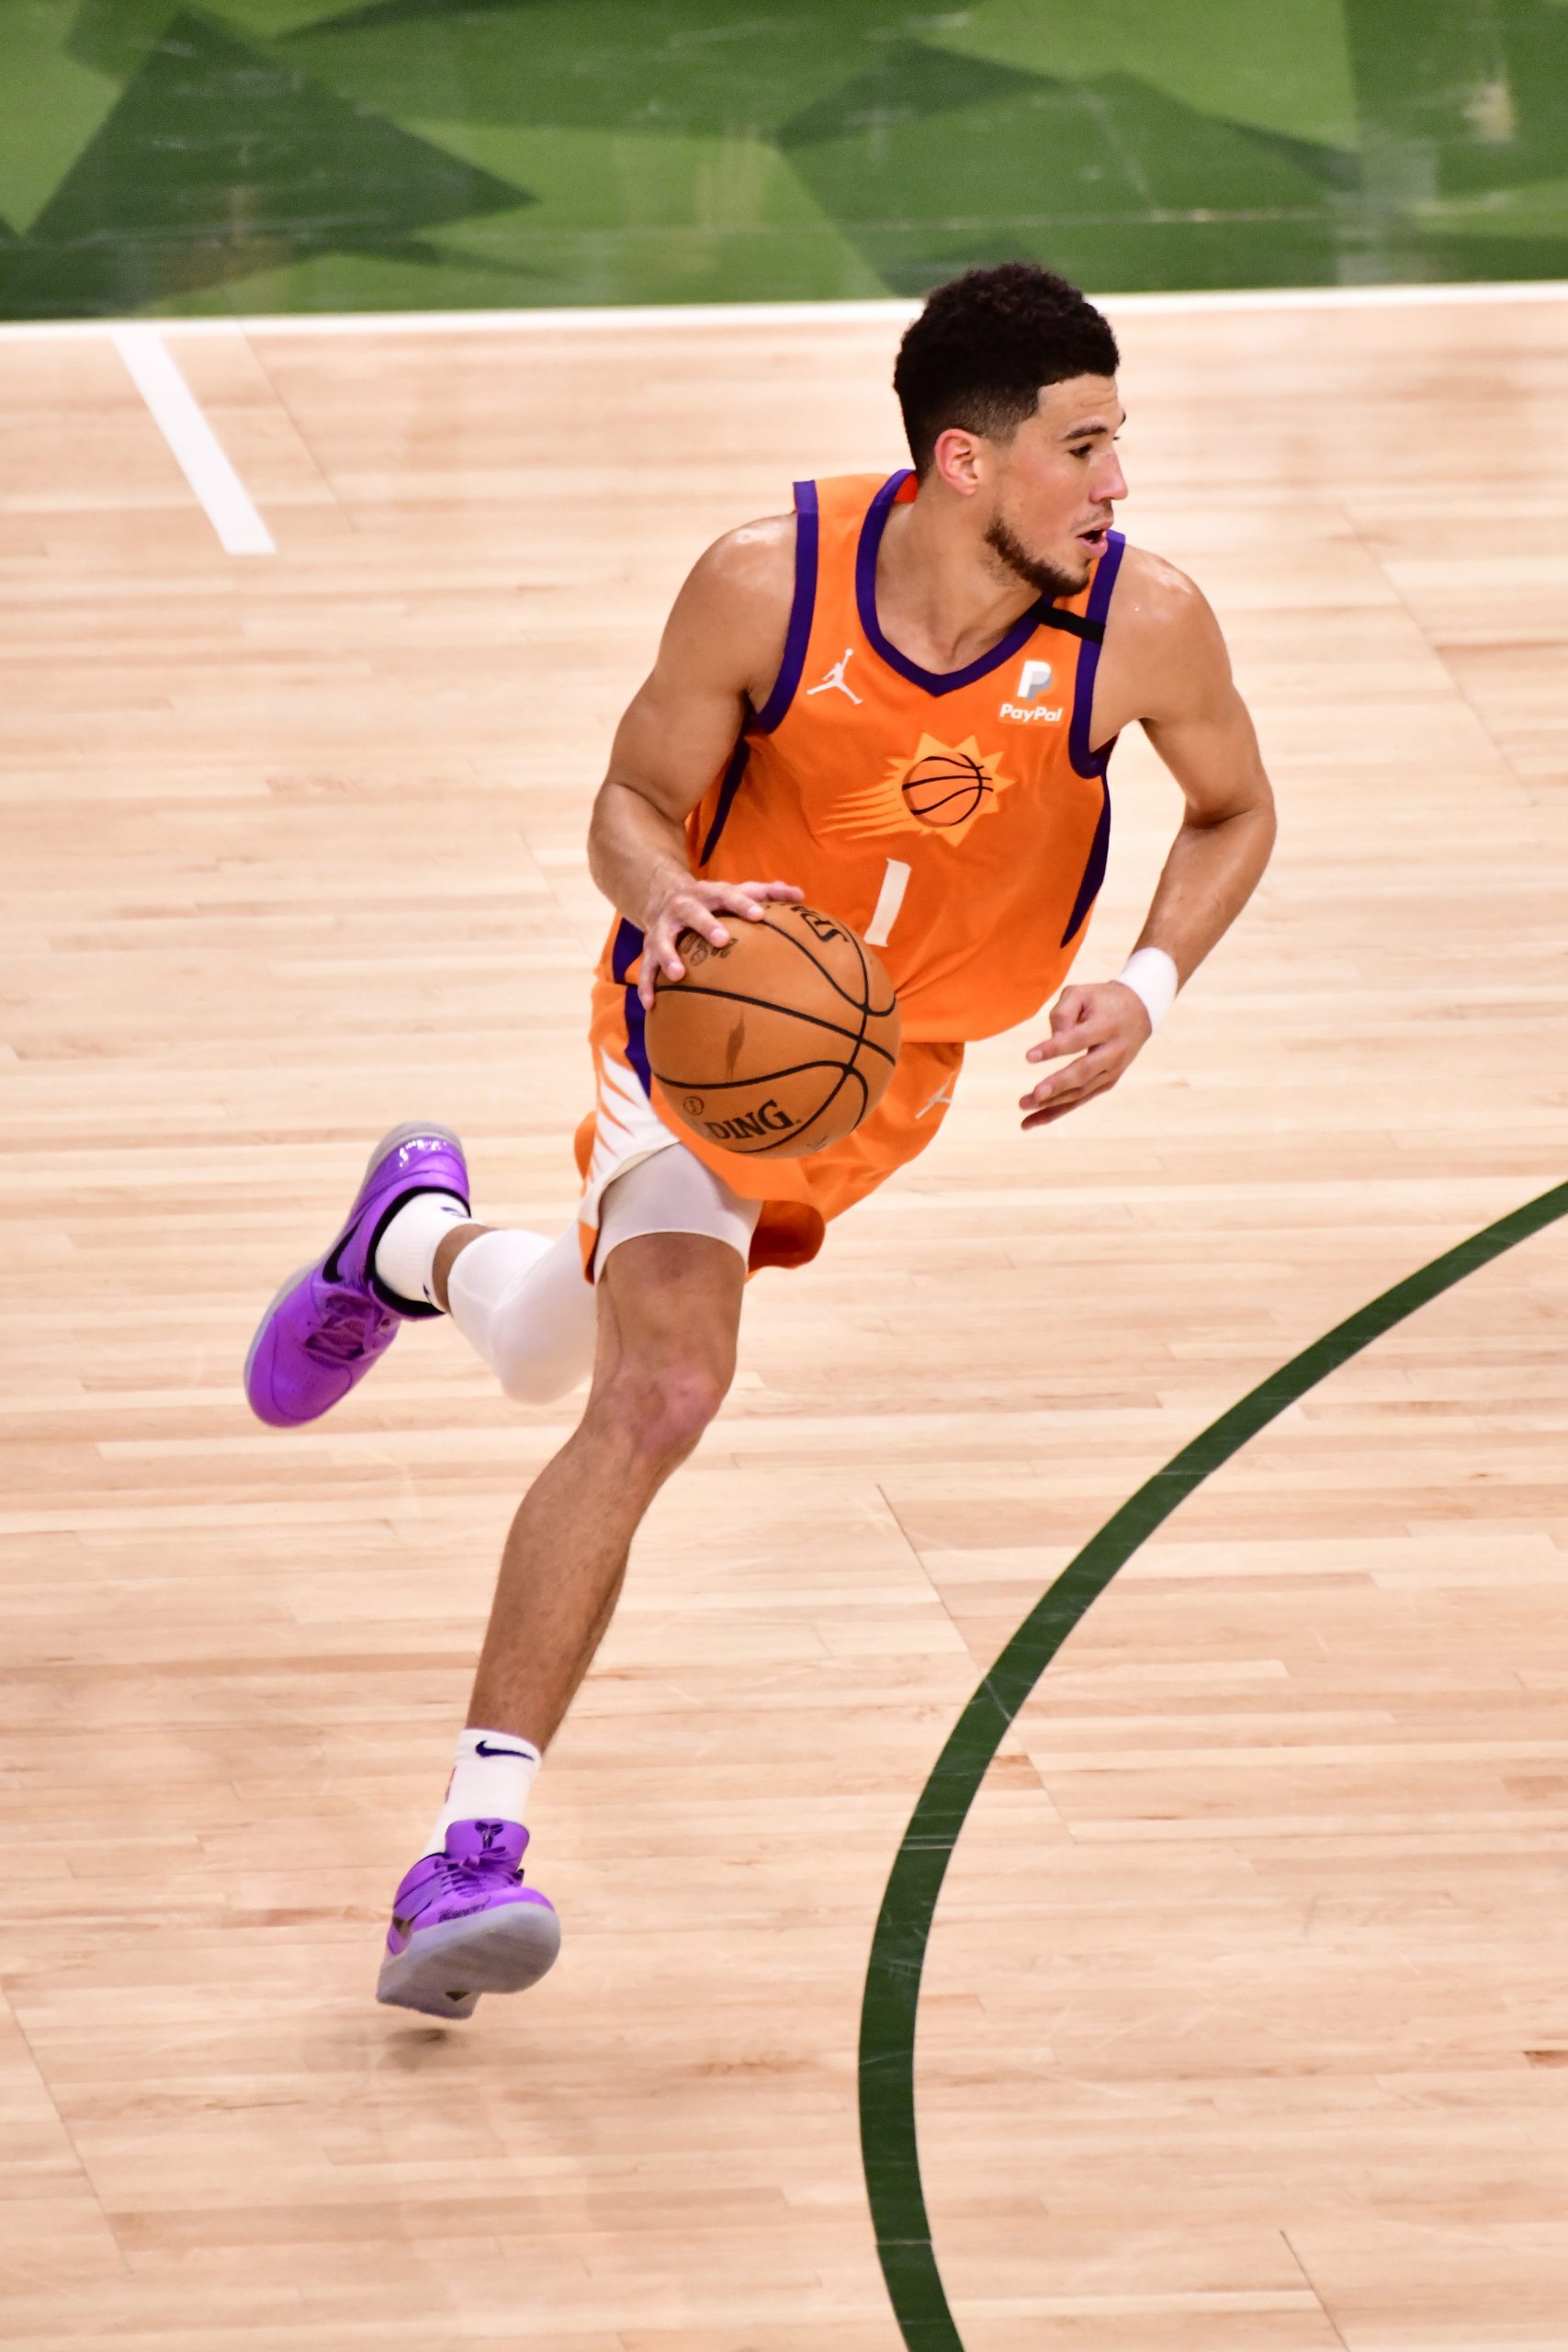 Devin Booker delivered the vintage performance Phoenix had to have